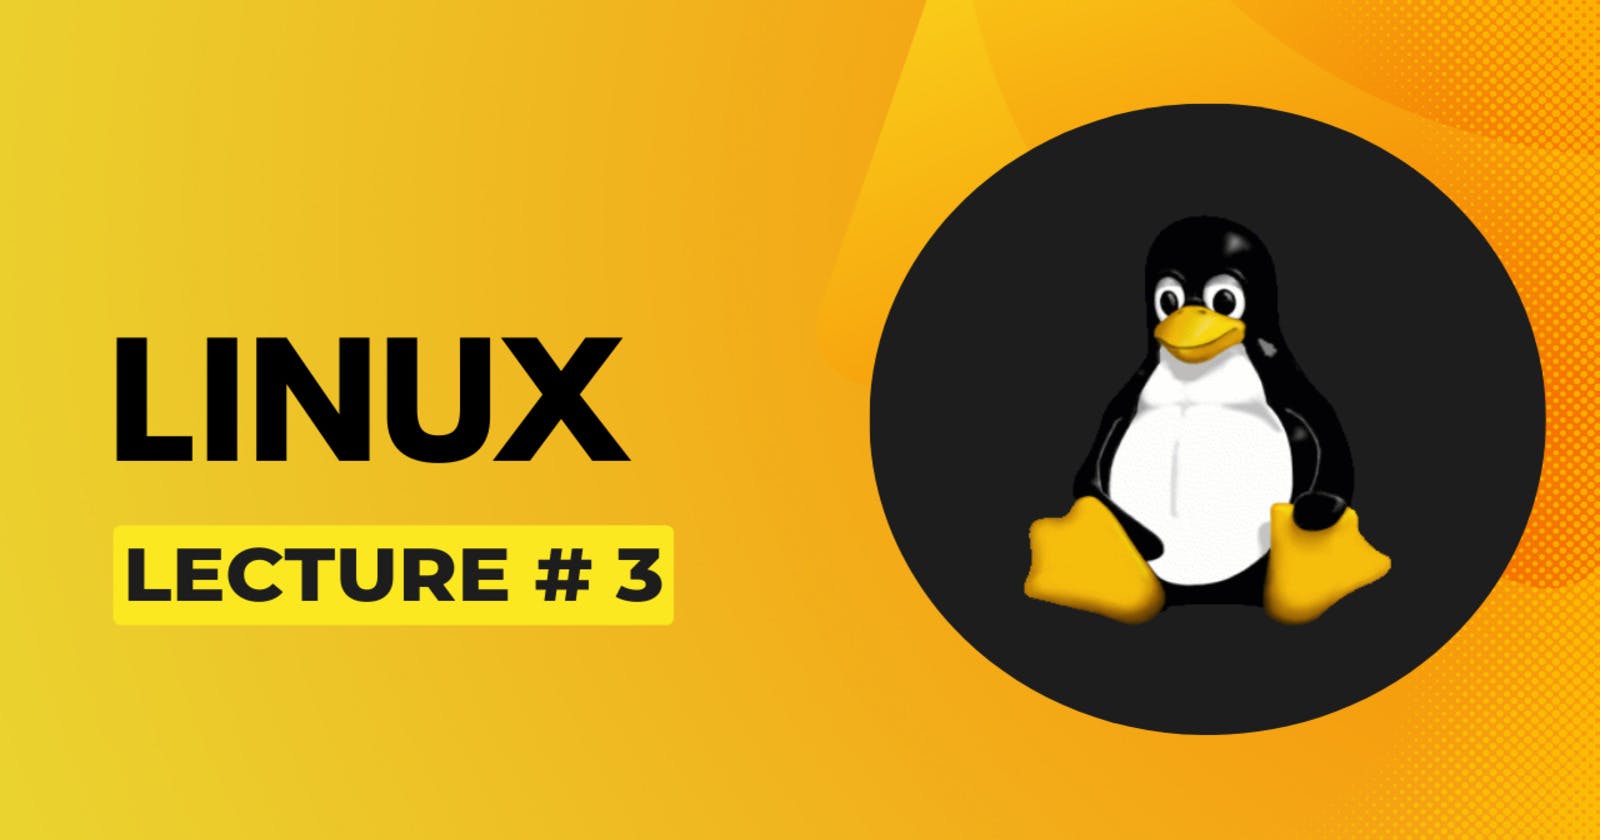 Lecture # 3 - Distributions of Linux